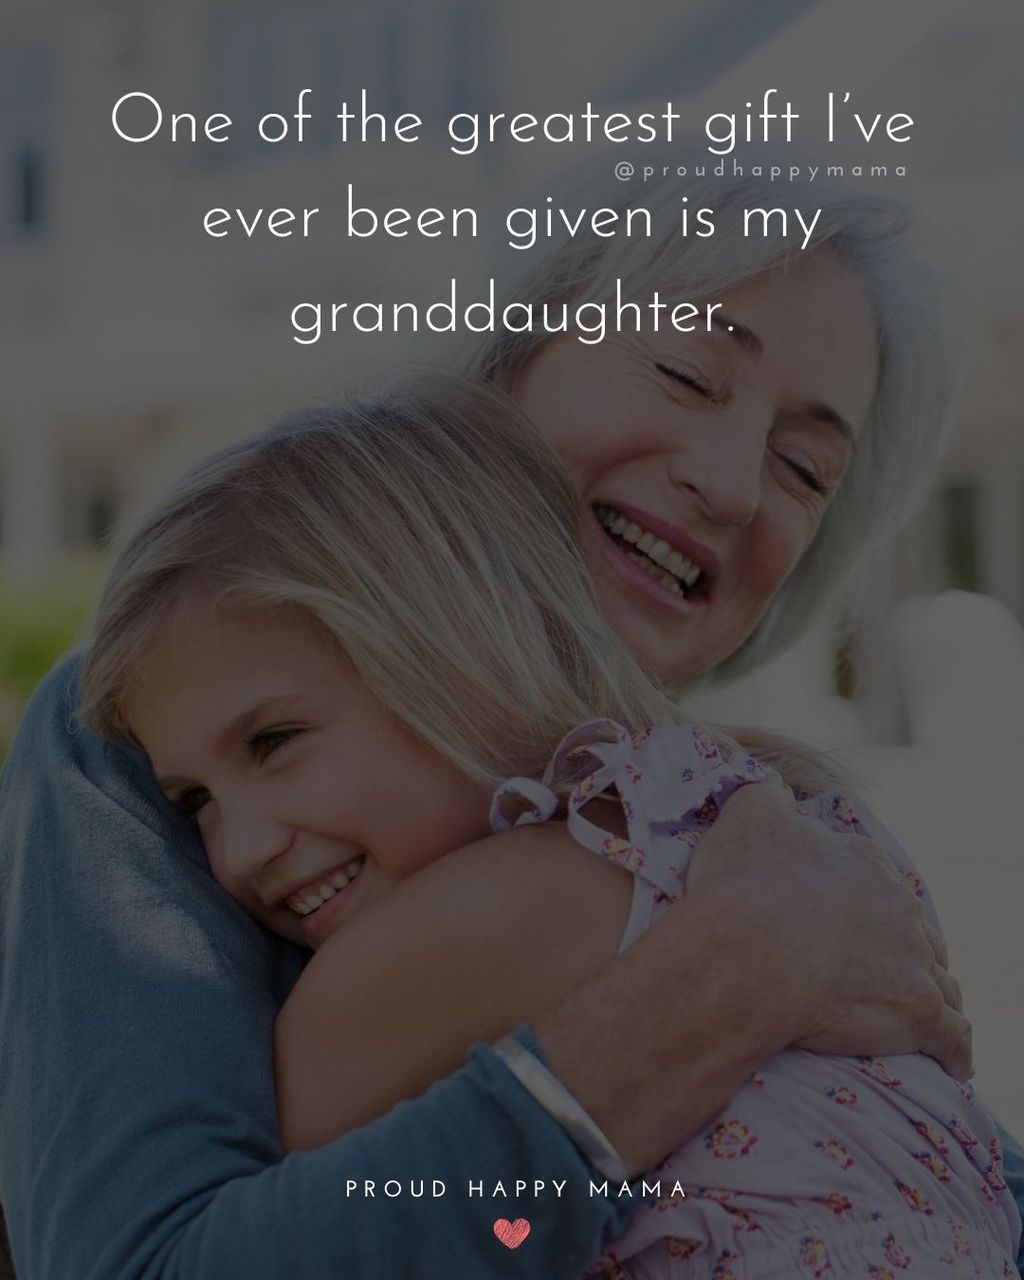 Grandmother hugging granddaughter with granddaughter quotes text overlay. ‘One of the greatest gift I’ve ever been given is my granddaughter.’